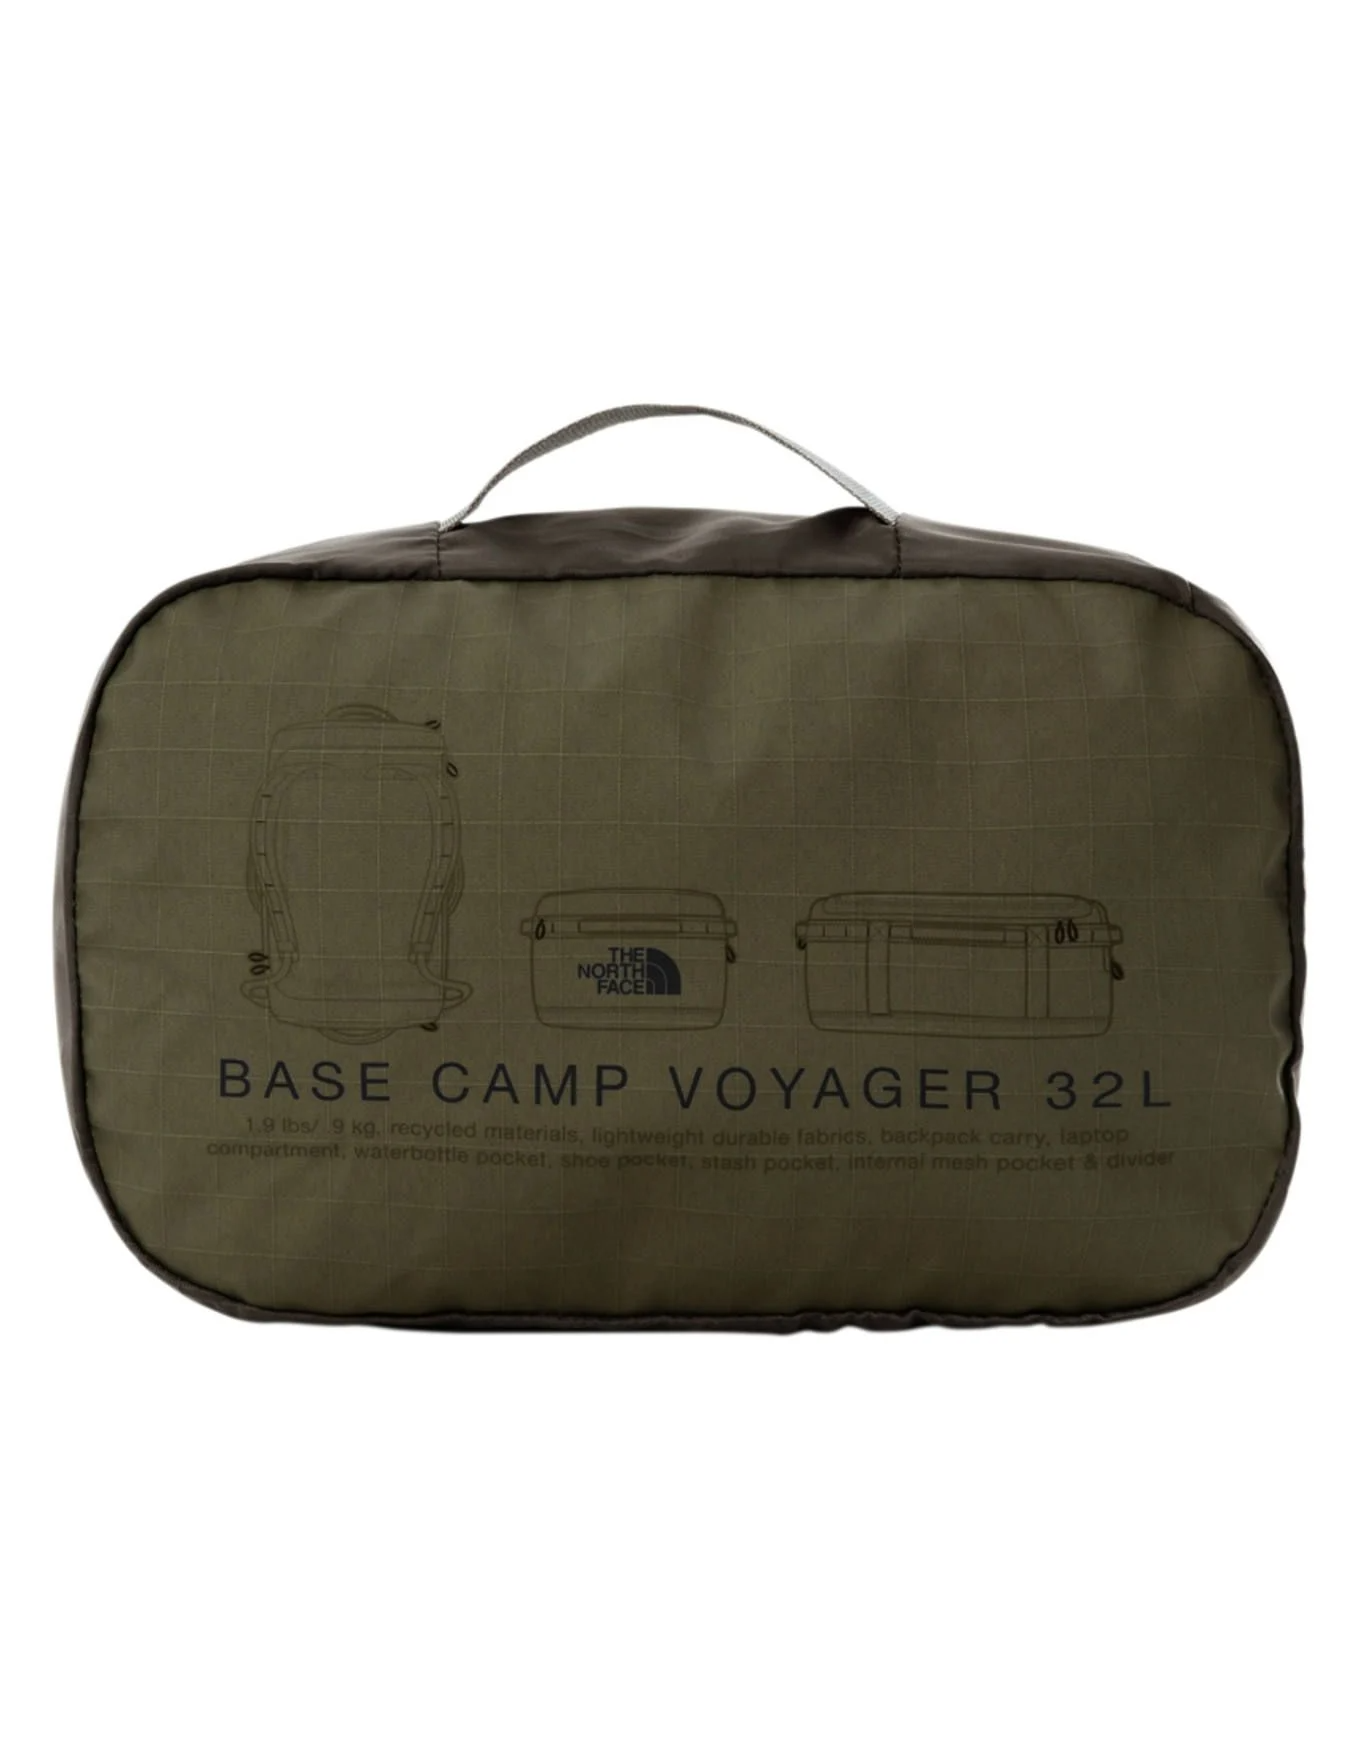 Duffel Bag Base Camp Voyager 32 L - New Taupe Green-TNF Black